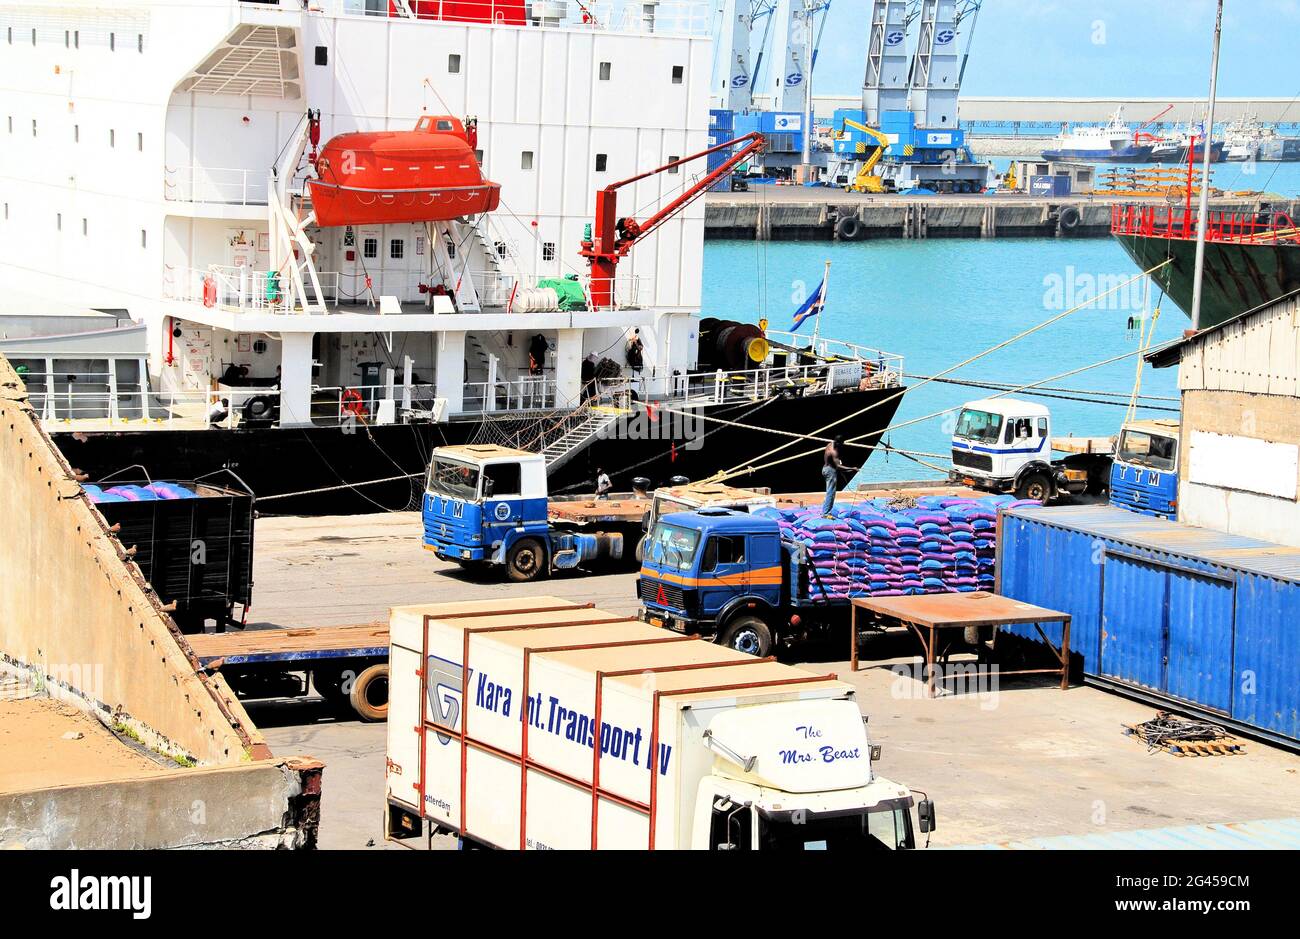 Unloading a ship in the Port of Lomé, Togo, while a man is loading a truck with sacks of newly arrived goods and other trucks wait their turn. Stock Photo